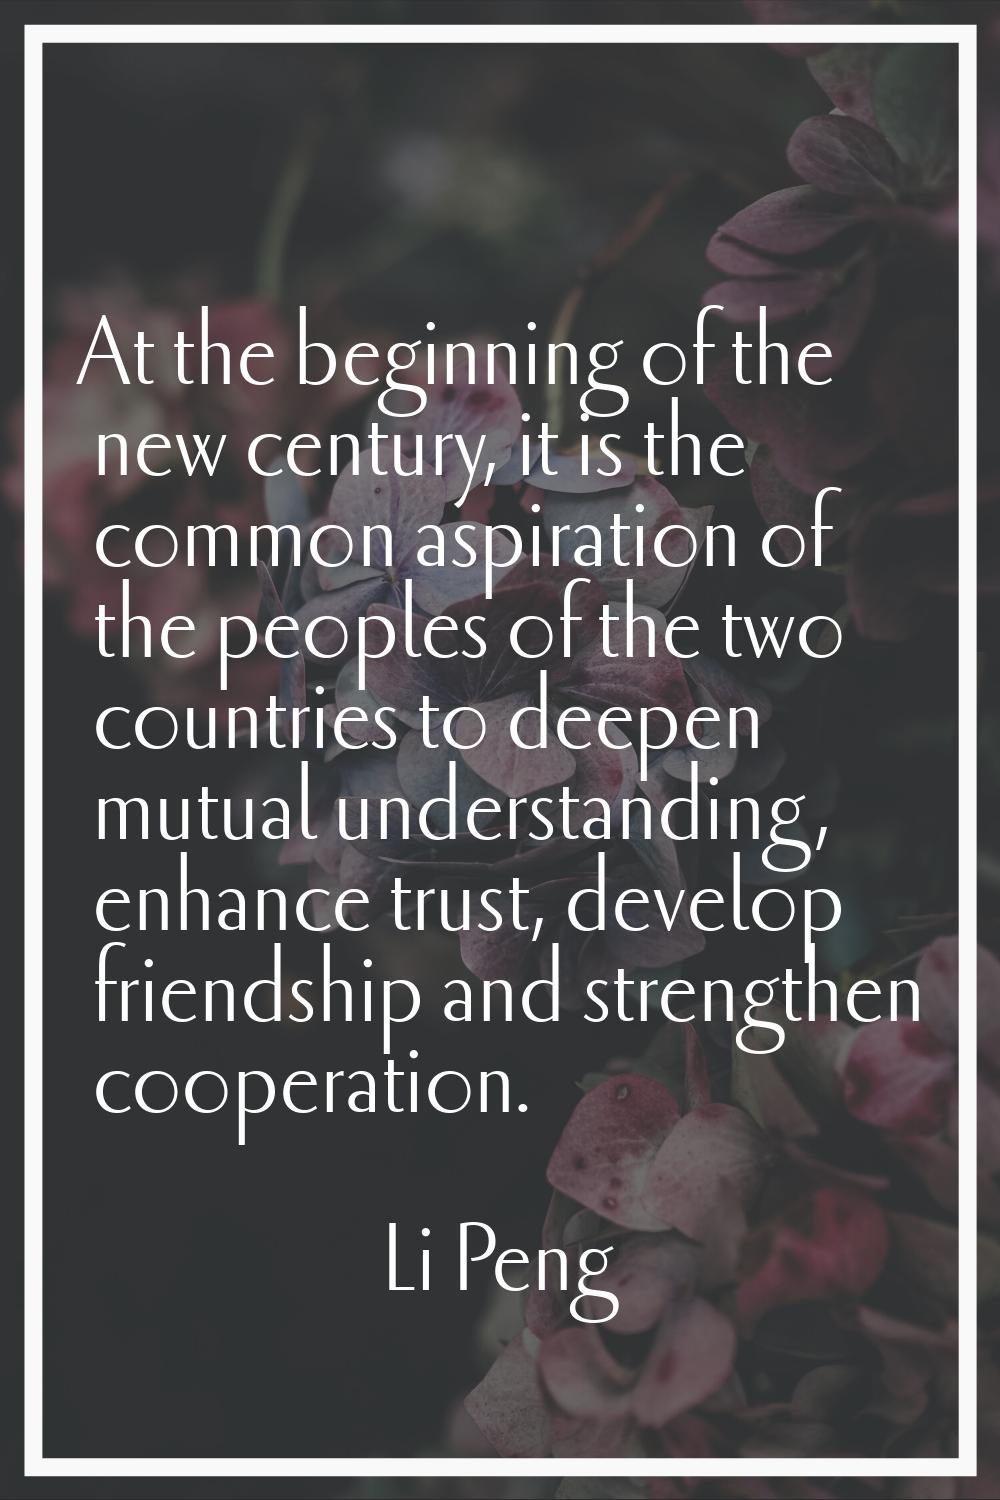 At the beginning of the new century, it is the common aspiration of the peoples of the two countrie